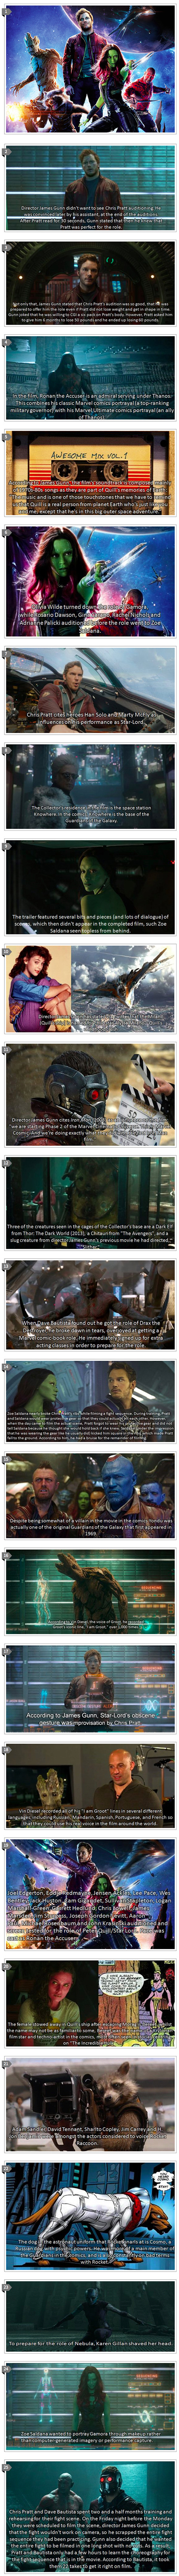 Guardians of the Galaxy Facts